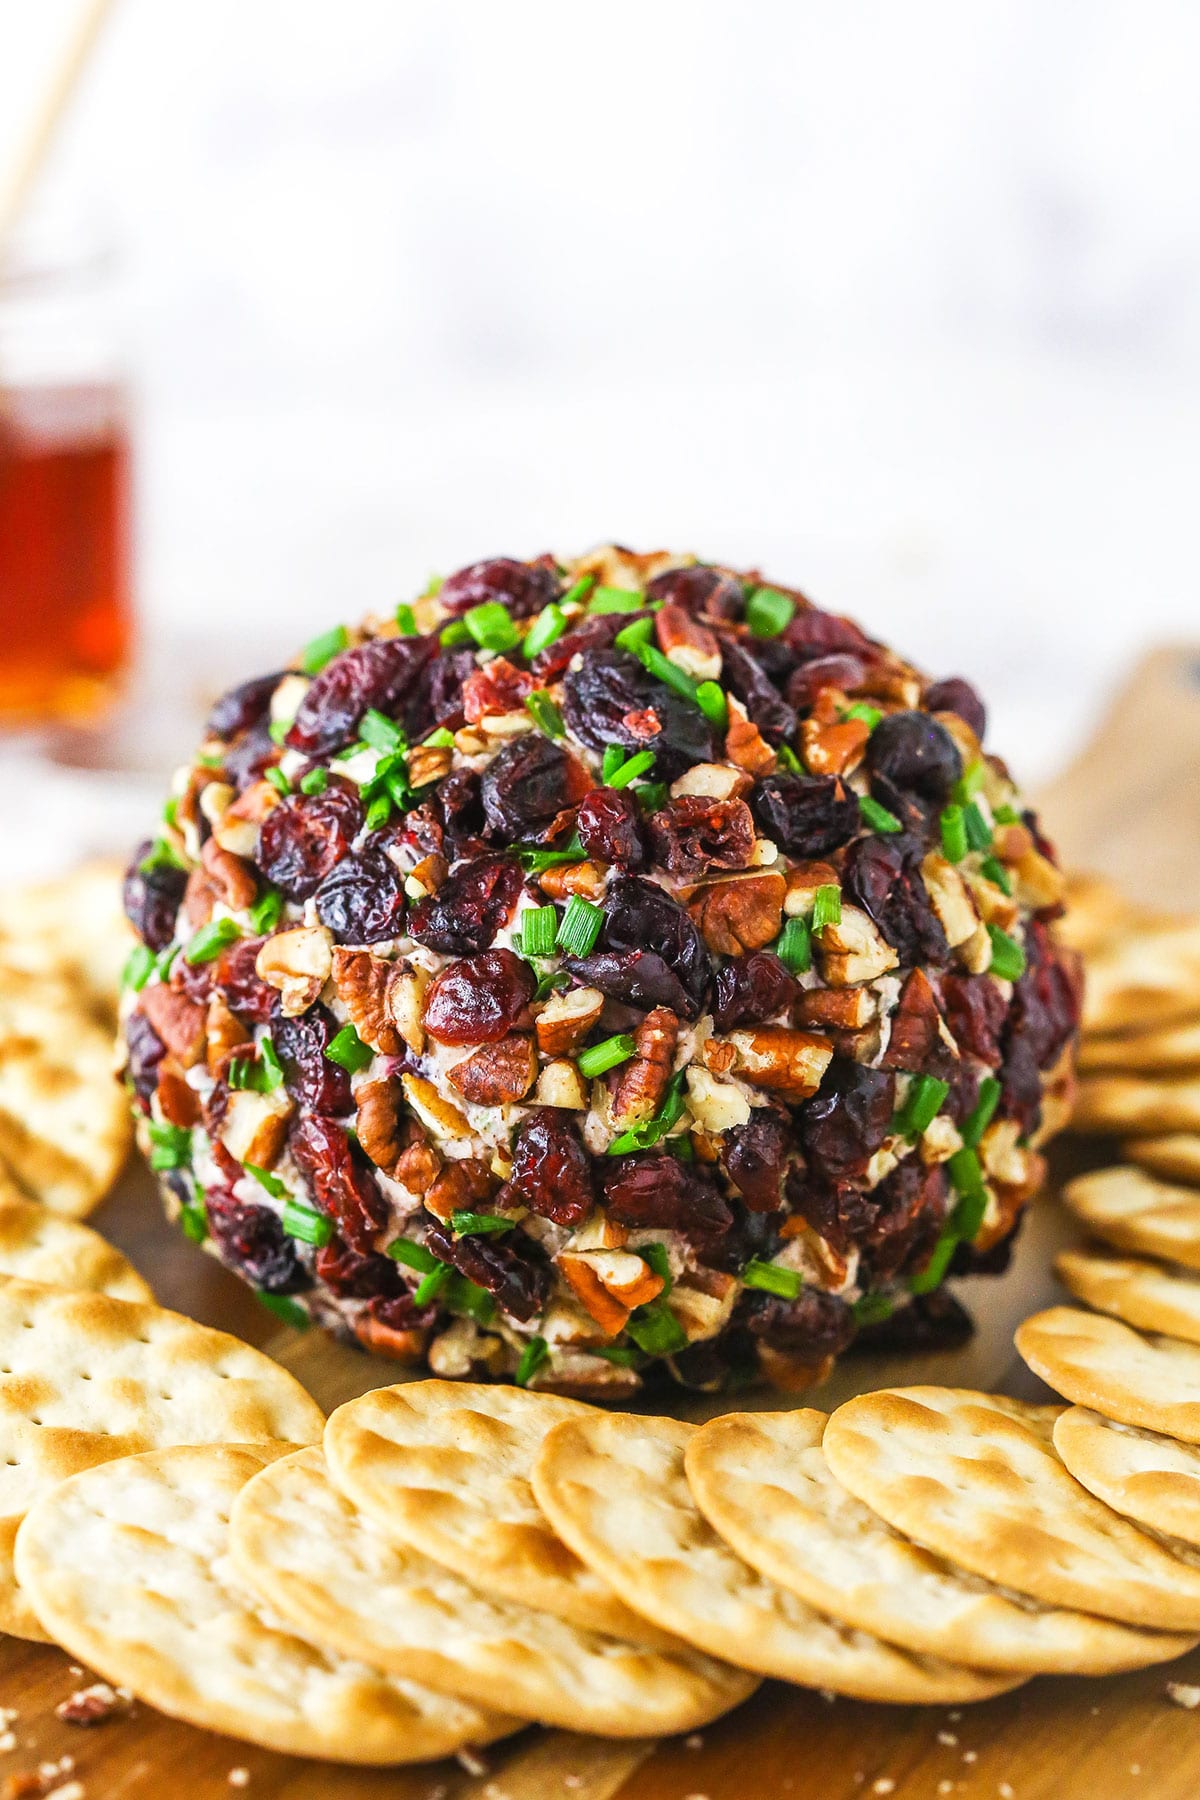 A close-up shot of a cranberry pecan cheeseball on a wooden surface with a white background